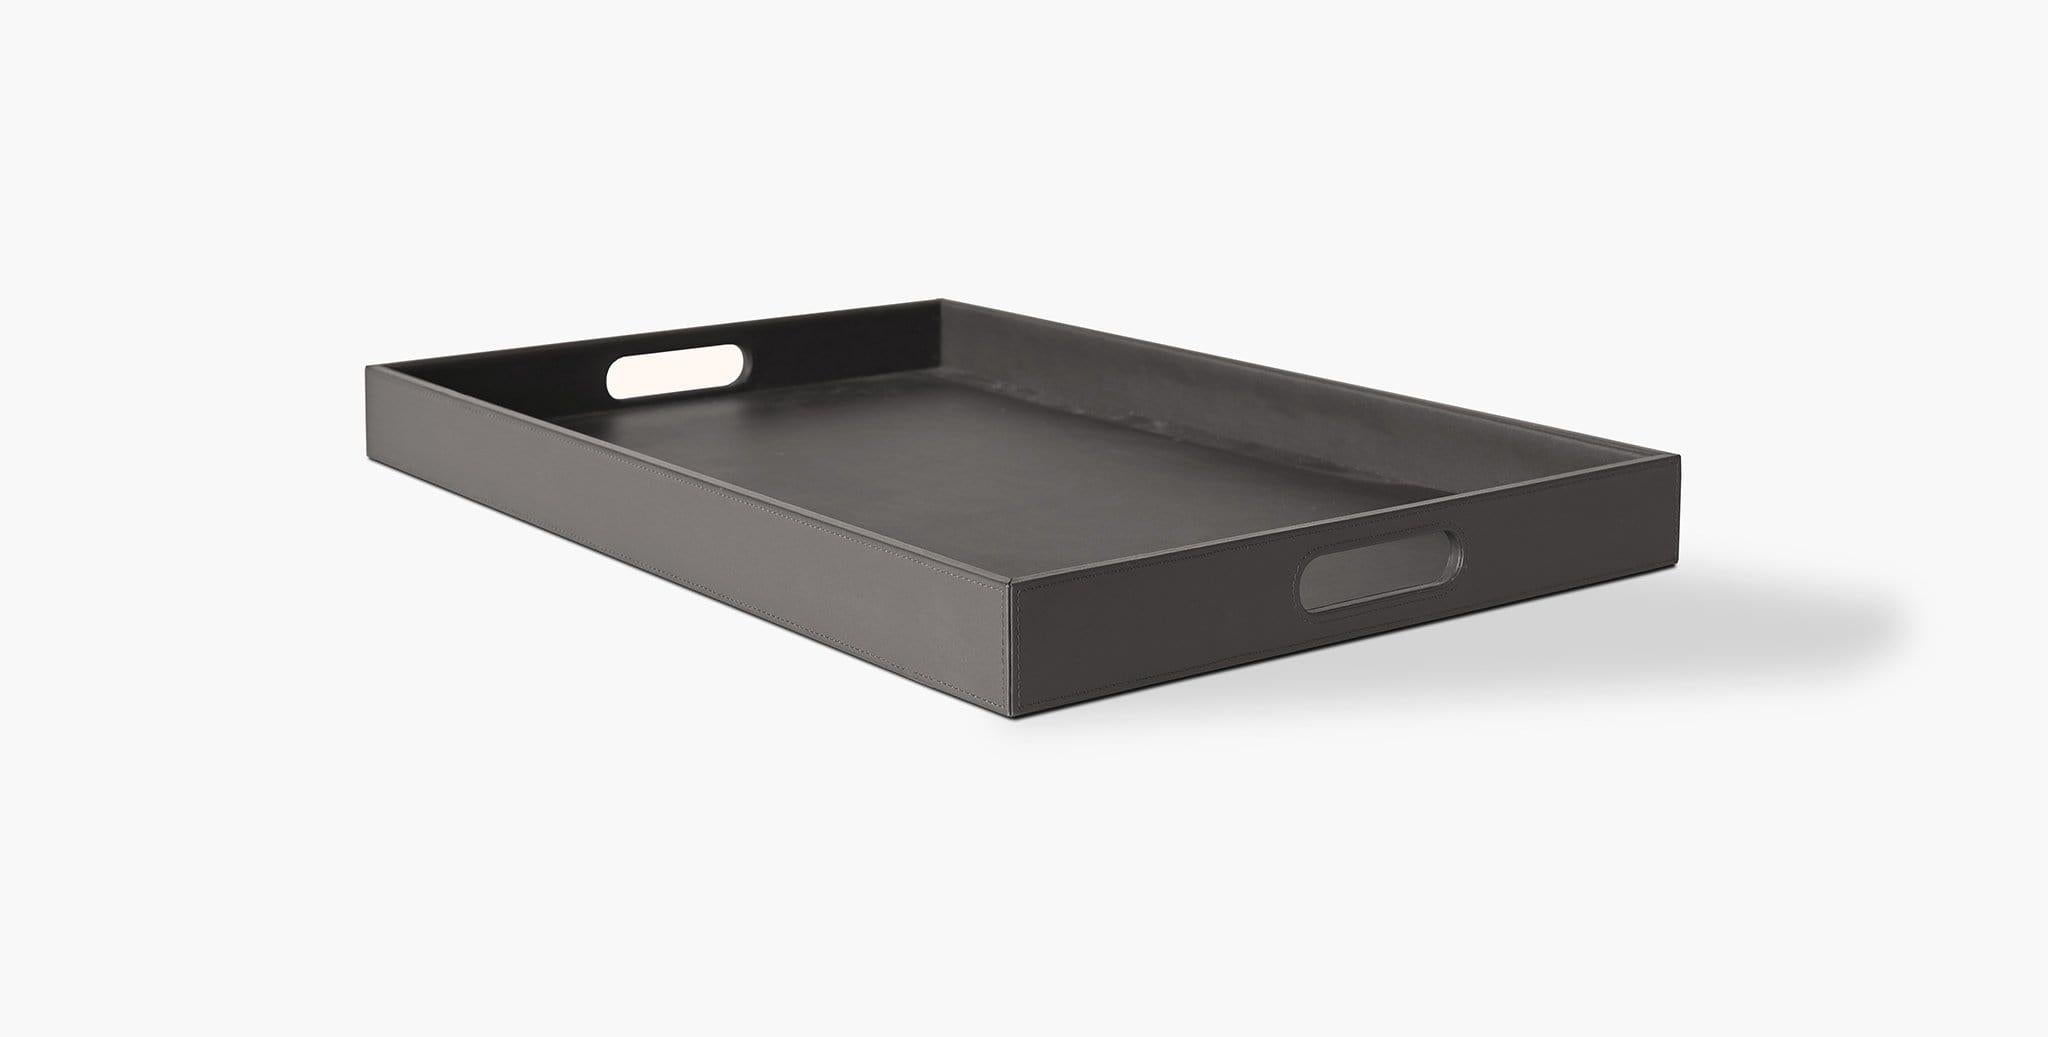 Our Lago Tray has side cutouts for easy handling, perfect for curating a beautiful coffee table vignette. Our handcrafted leathers and finishes are inspired by the natural variations within fibers, textures, and weaves. Each selection is